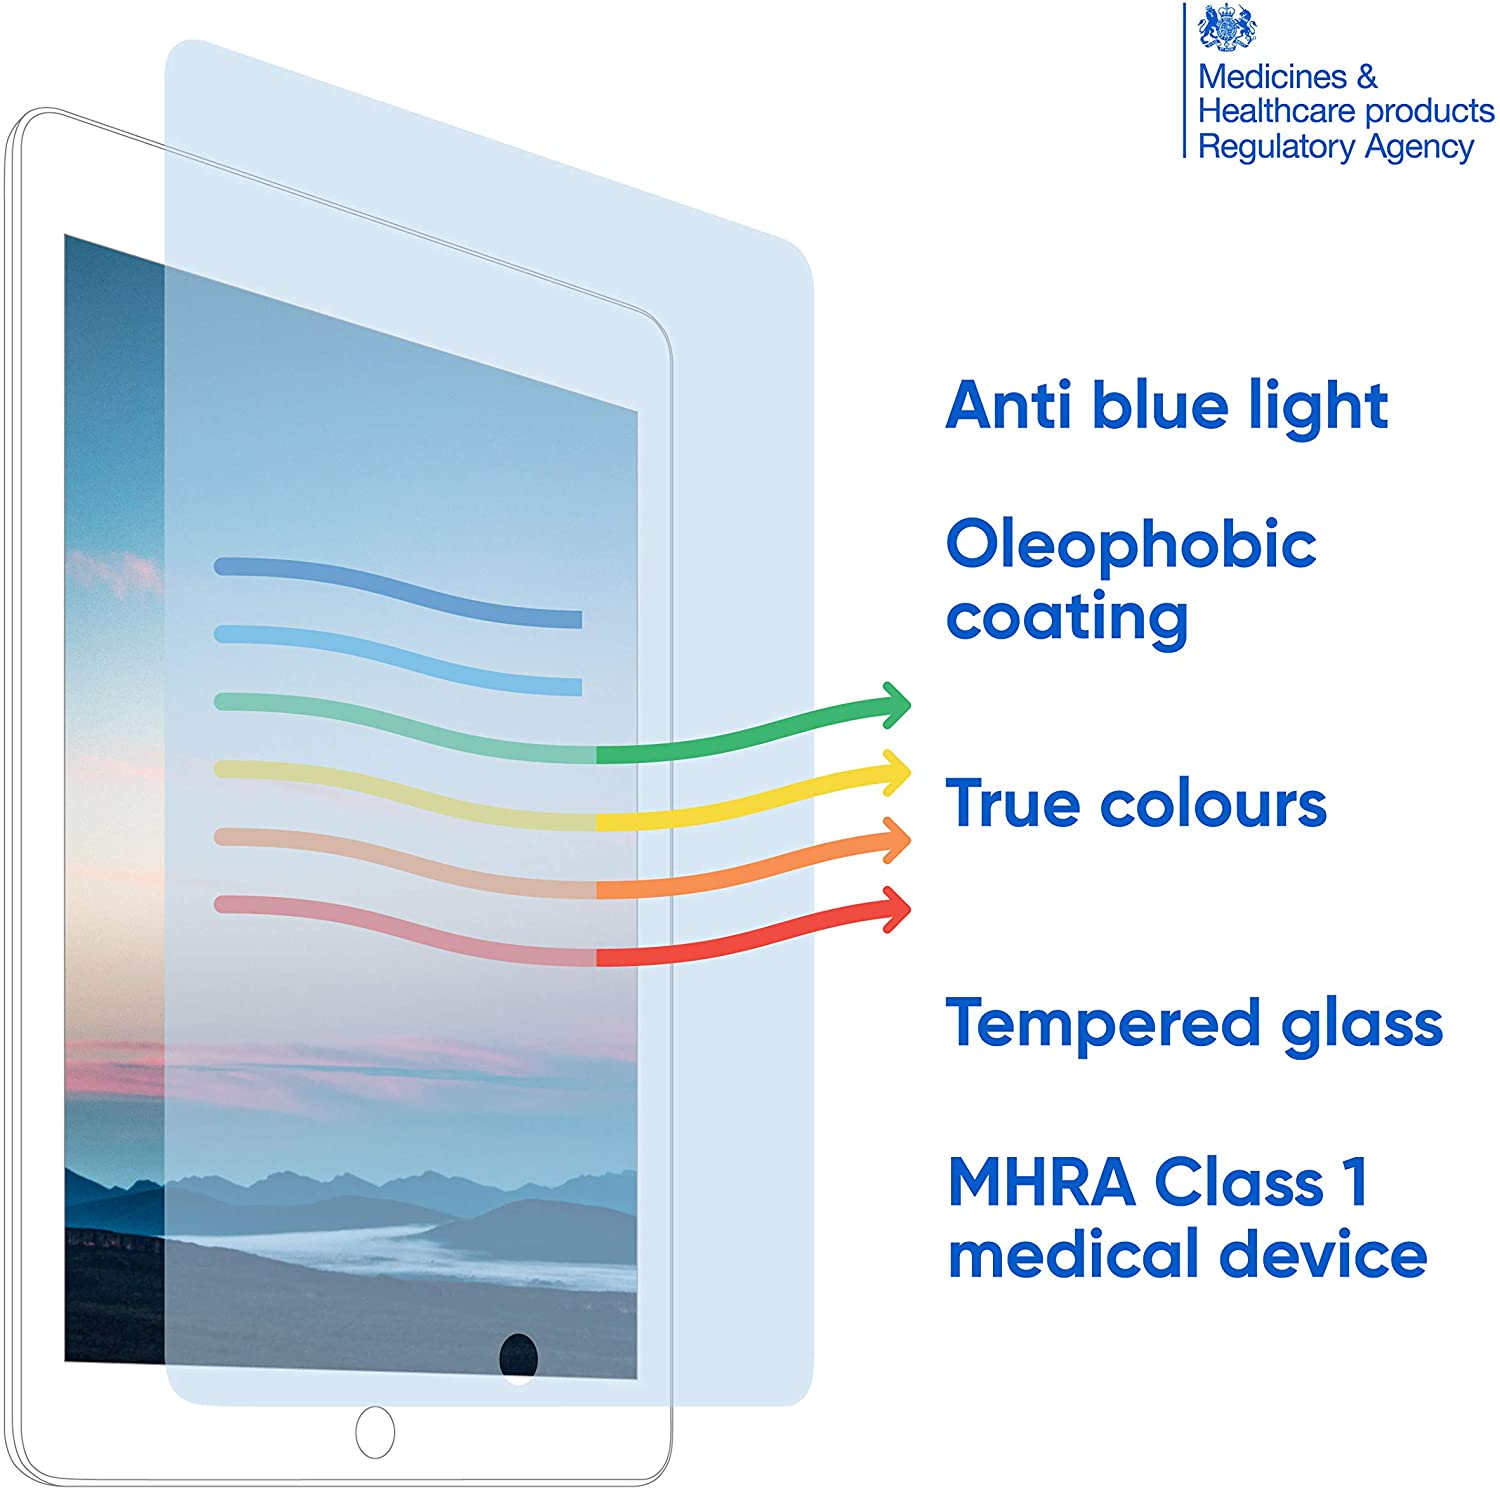 ocushield blue light filter screen cover over the screen of a laptop and the British Governments' MHRA department logo.  a list of the products features